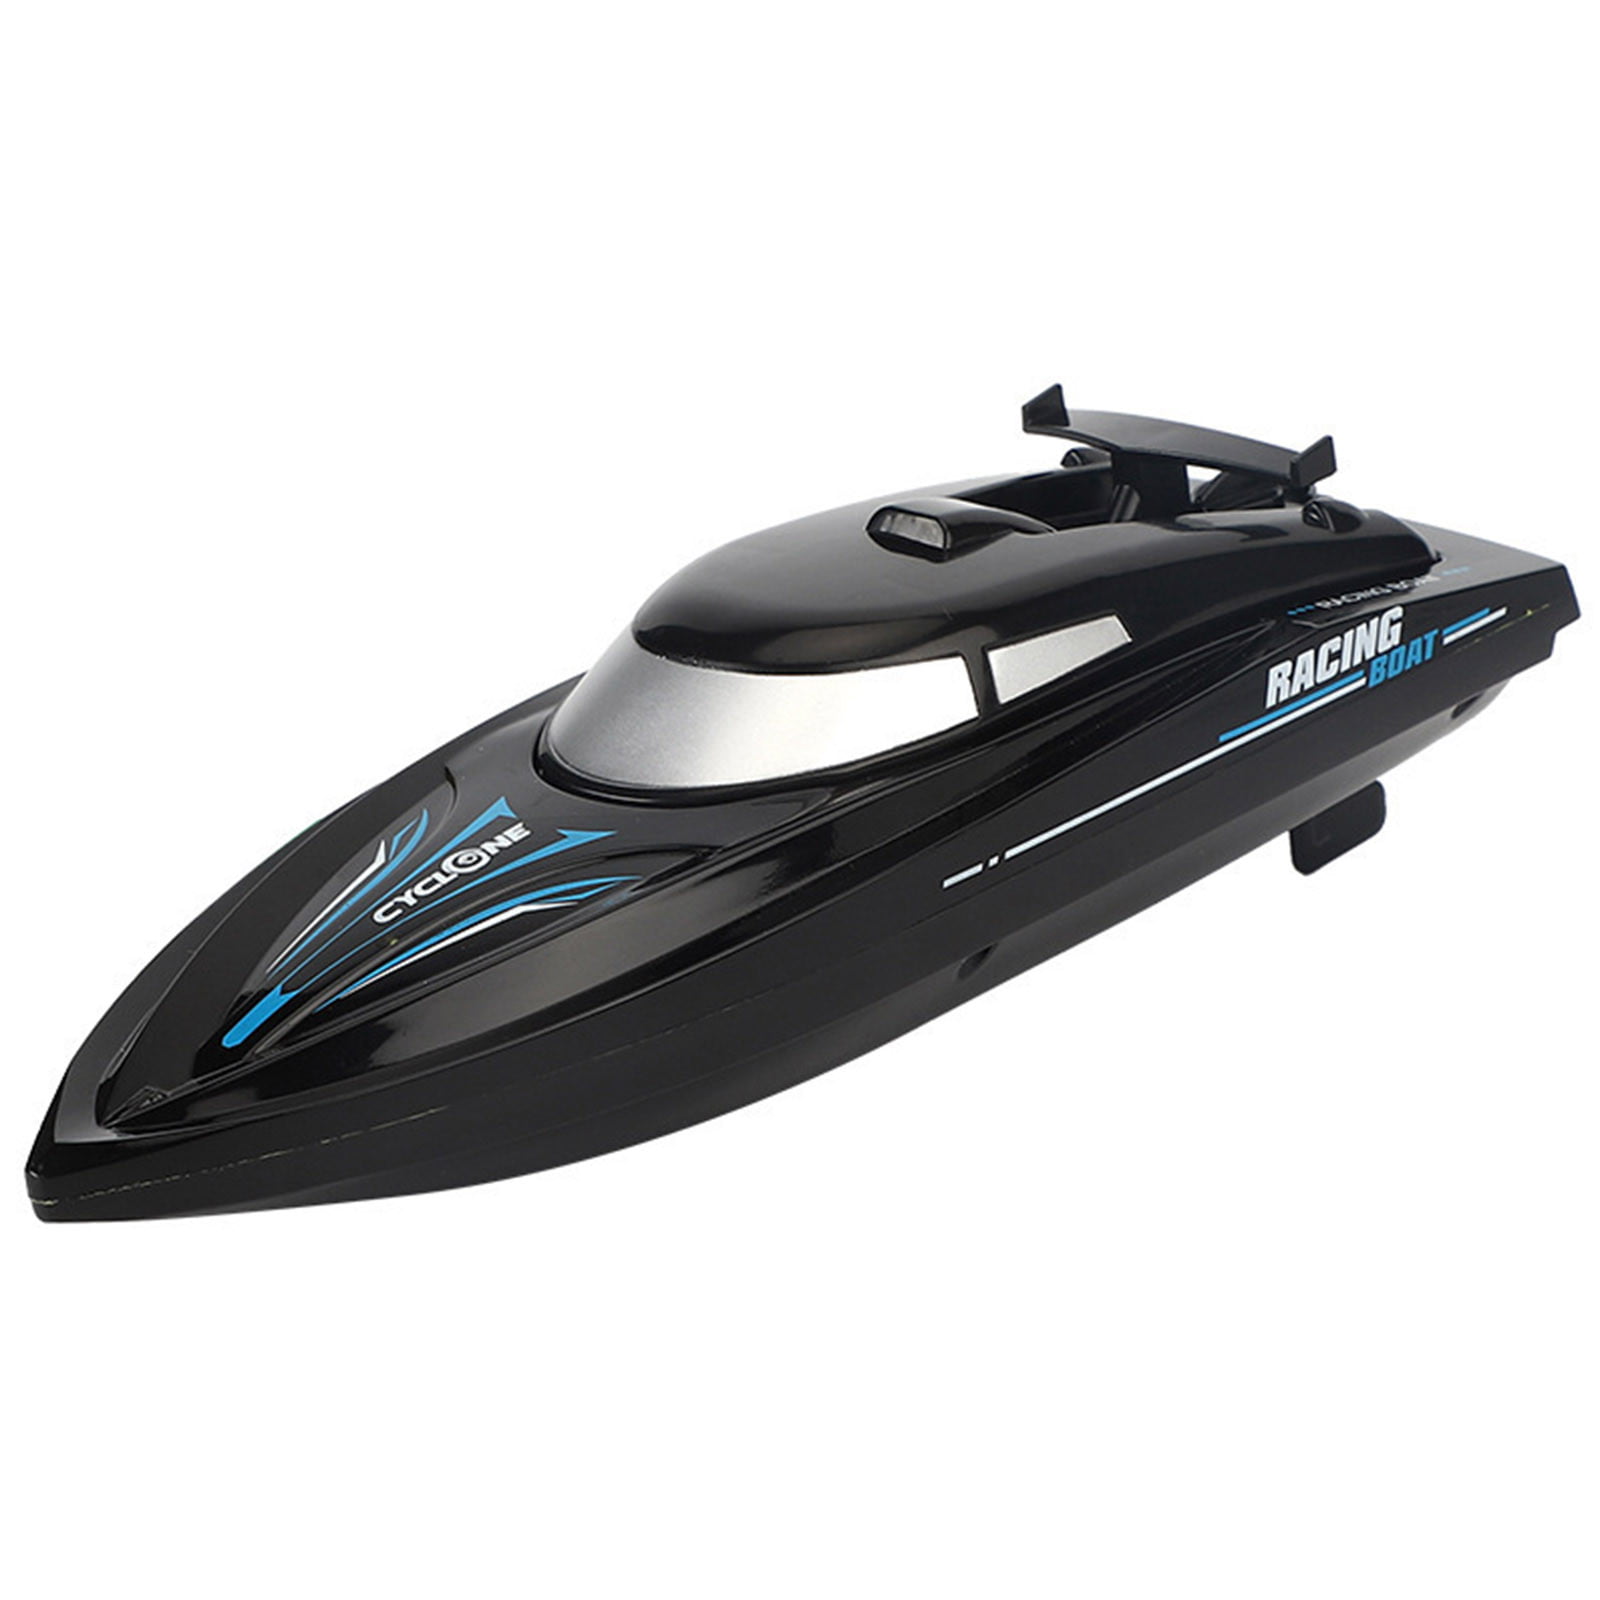 H100 RC Boat Model 2.4G Racing High Speed Radio Control 180° Toy Gift Watercraft 